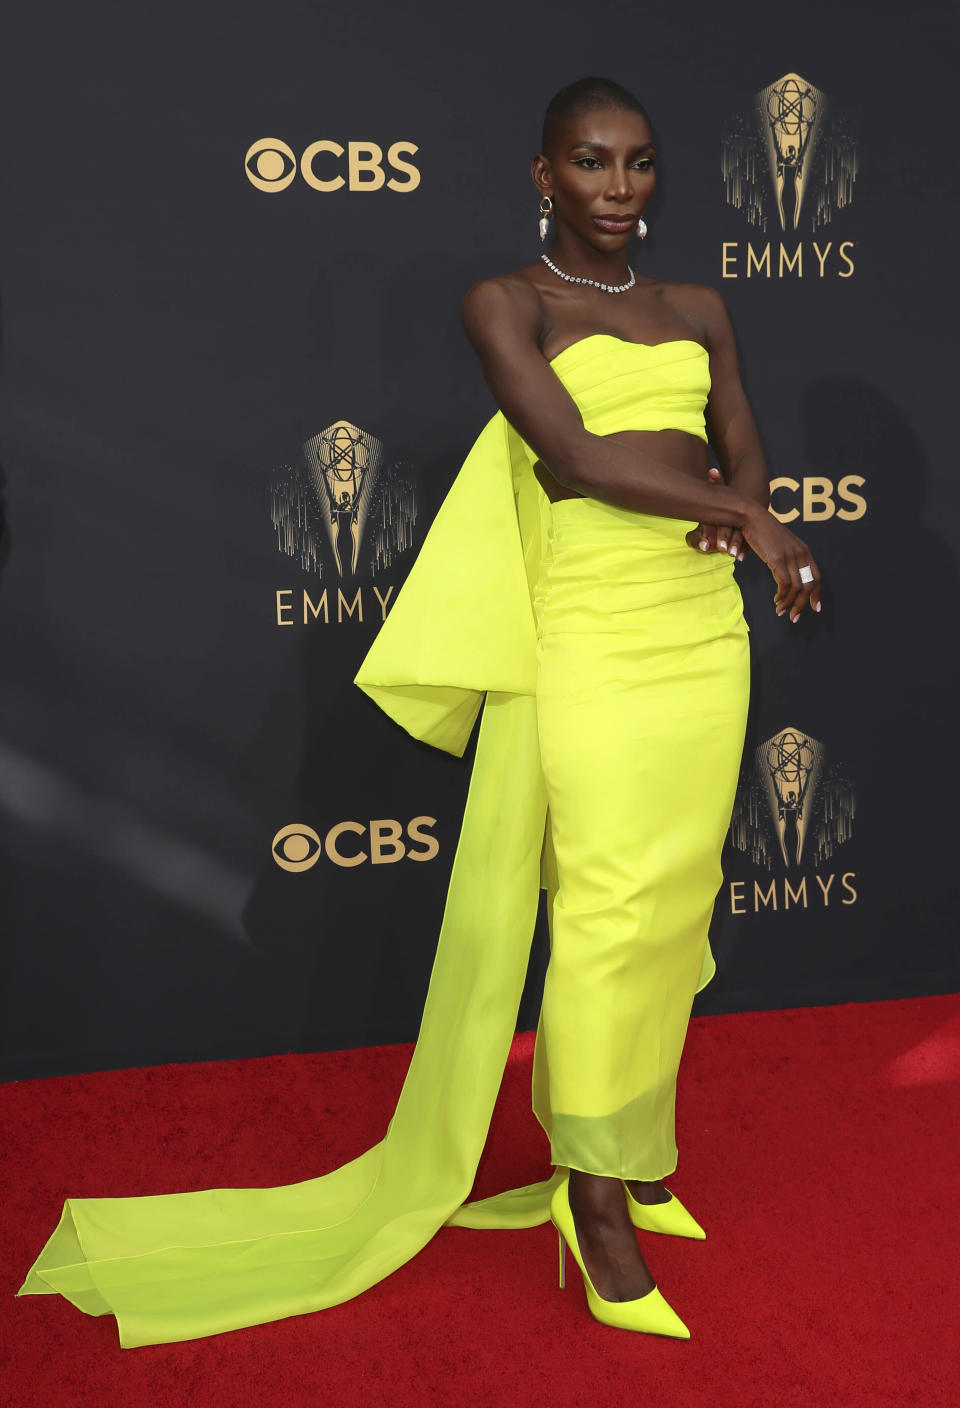 Michaela Coel arrives at the 73rd Emmy Awards at the JW Marriott on Sunday, Sept. 19, 2021, at L.A. Live in Los Angeles. - Credit: Danny Moloshok/Invision/AP